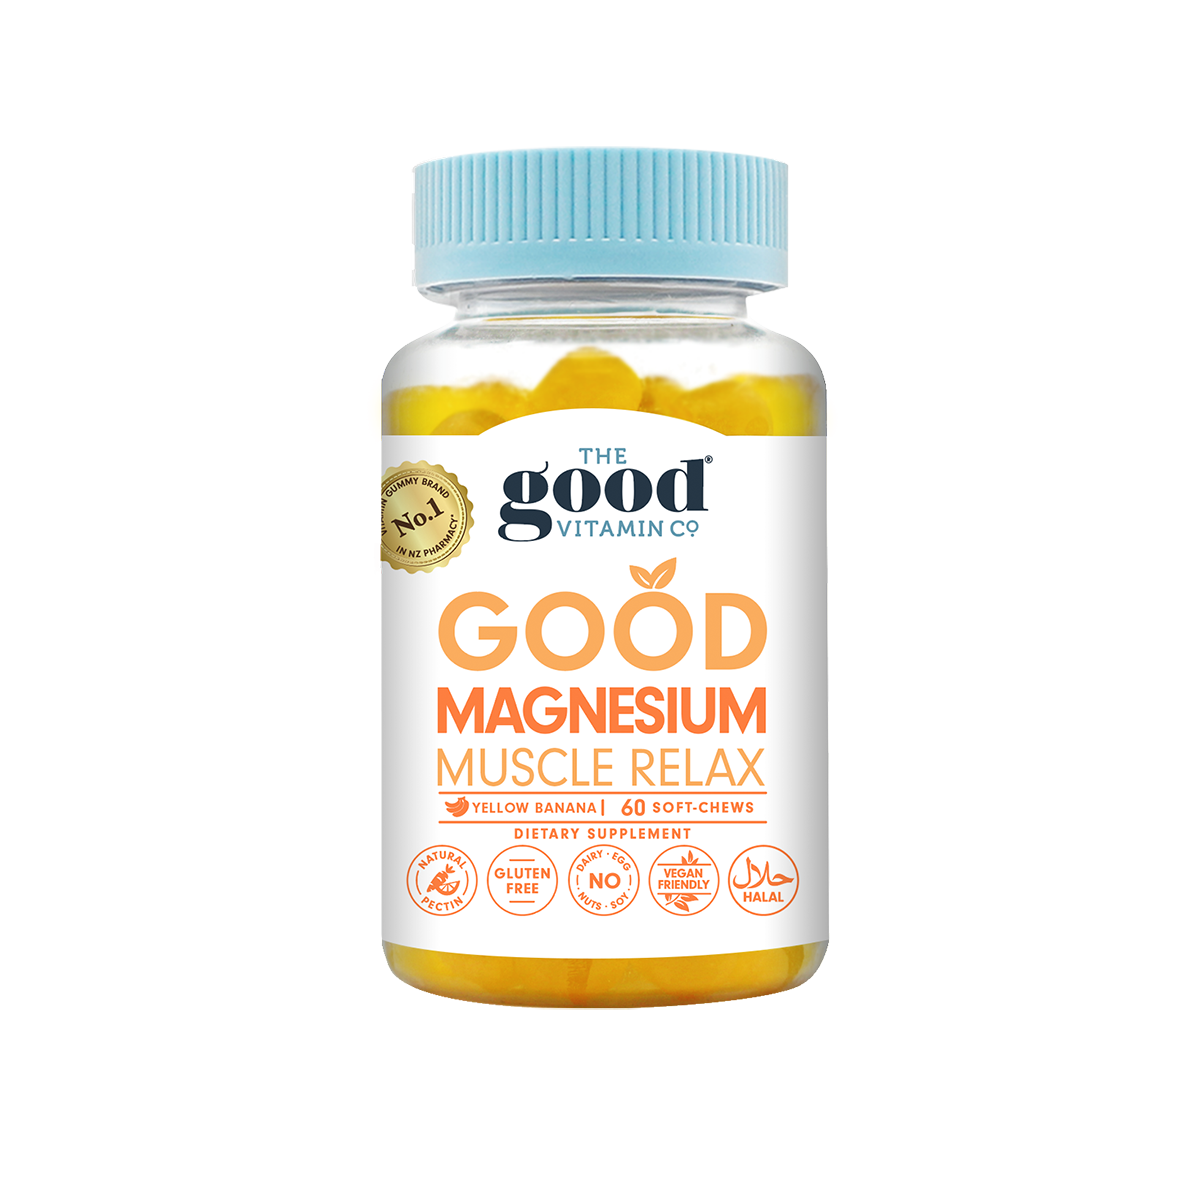 The Good Vitamin CO. Good Magnesium Muscle Relax 60 Soft-Chews.